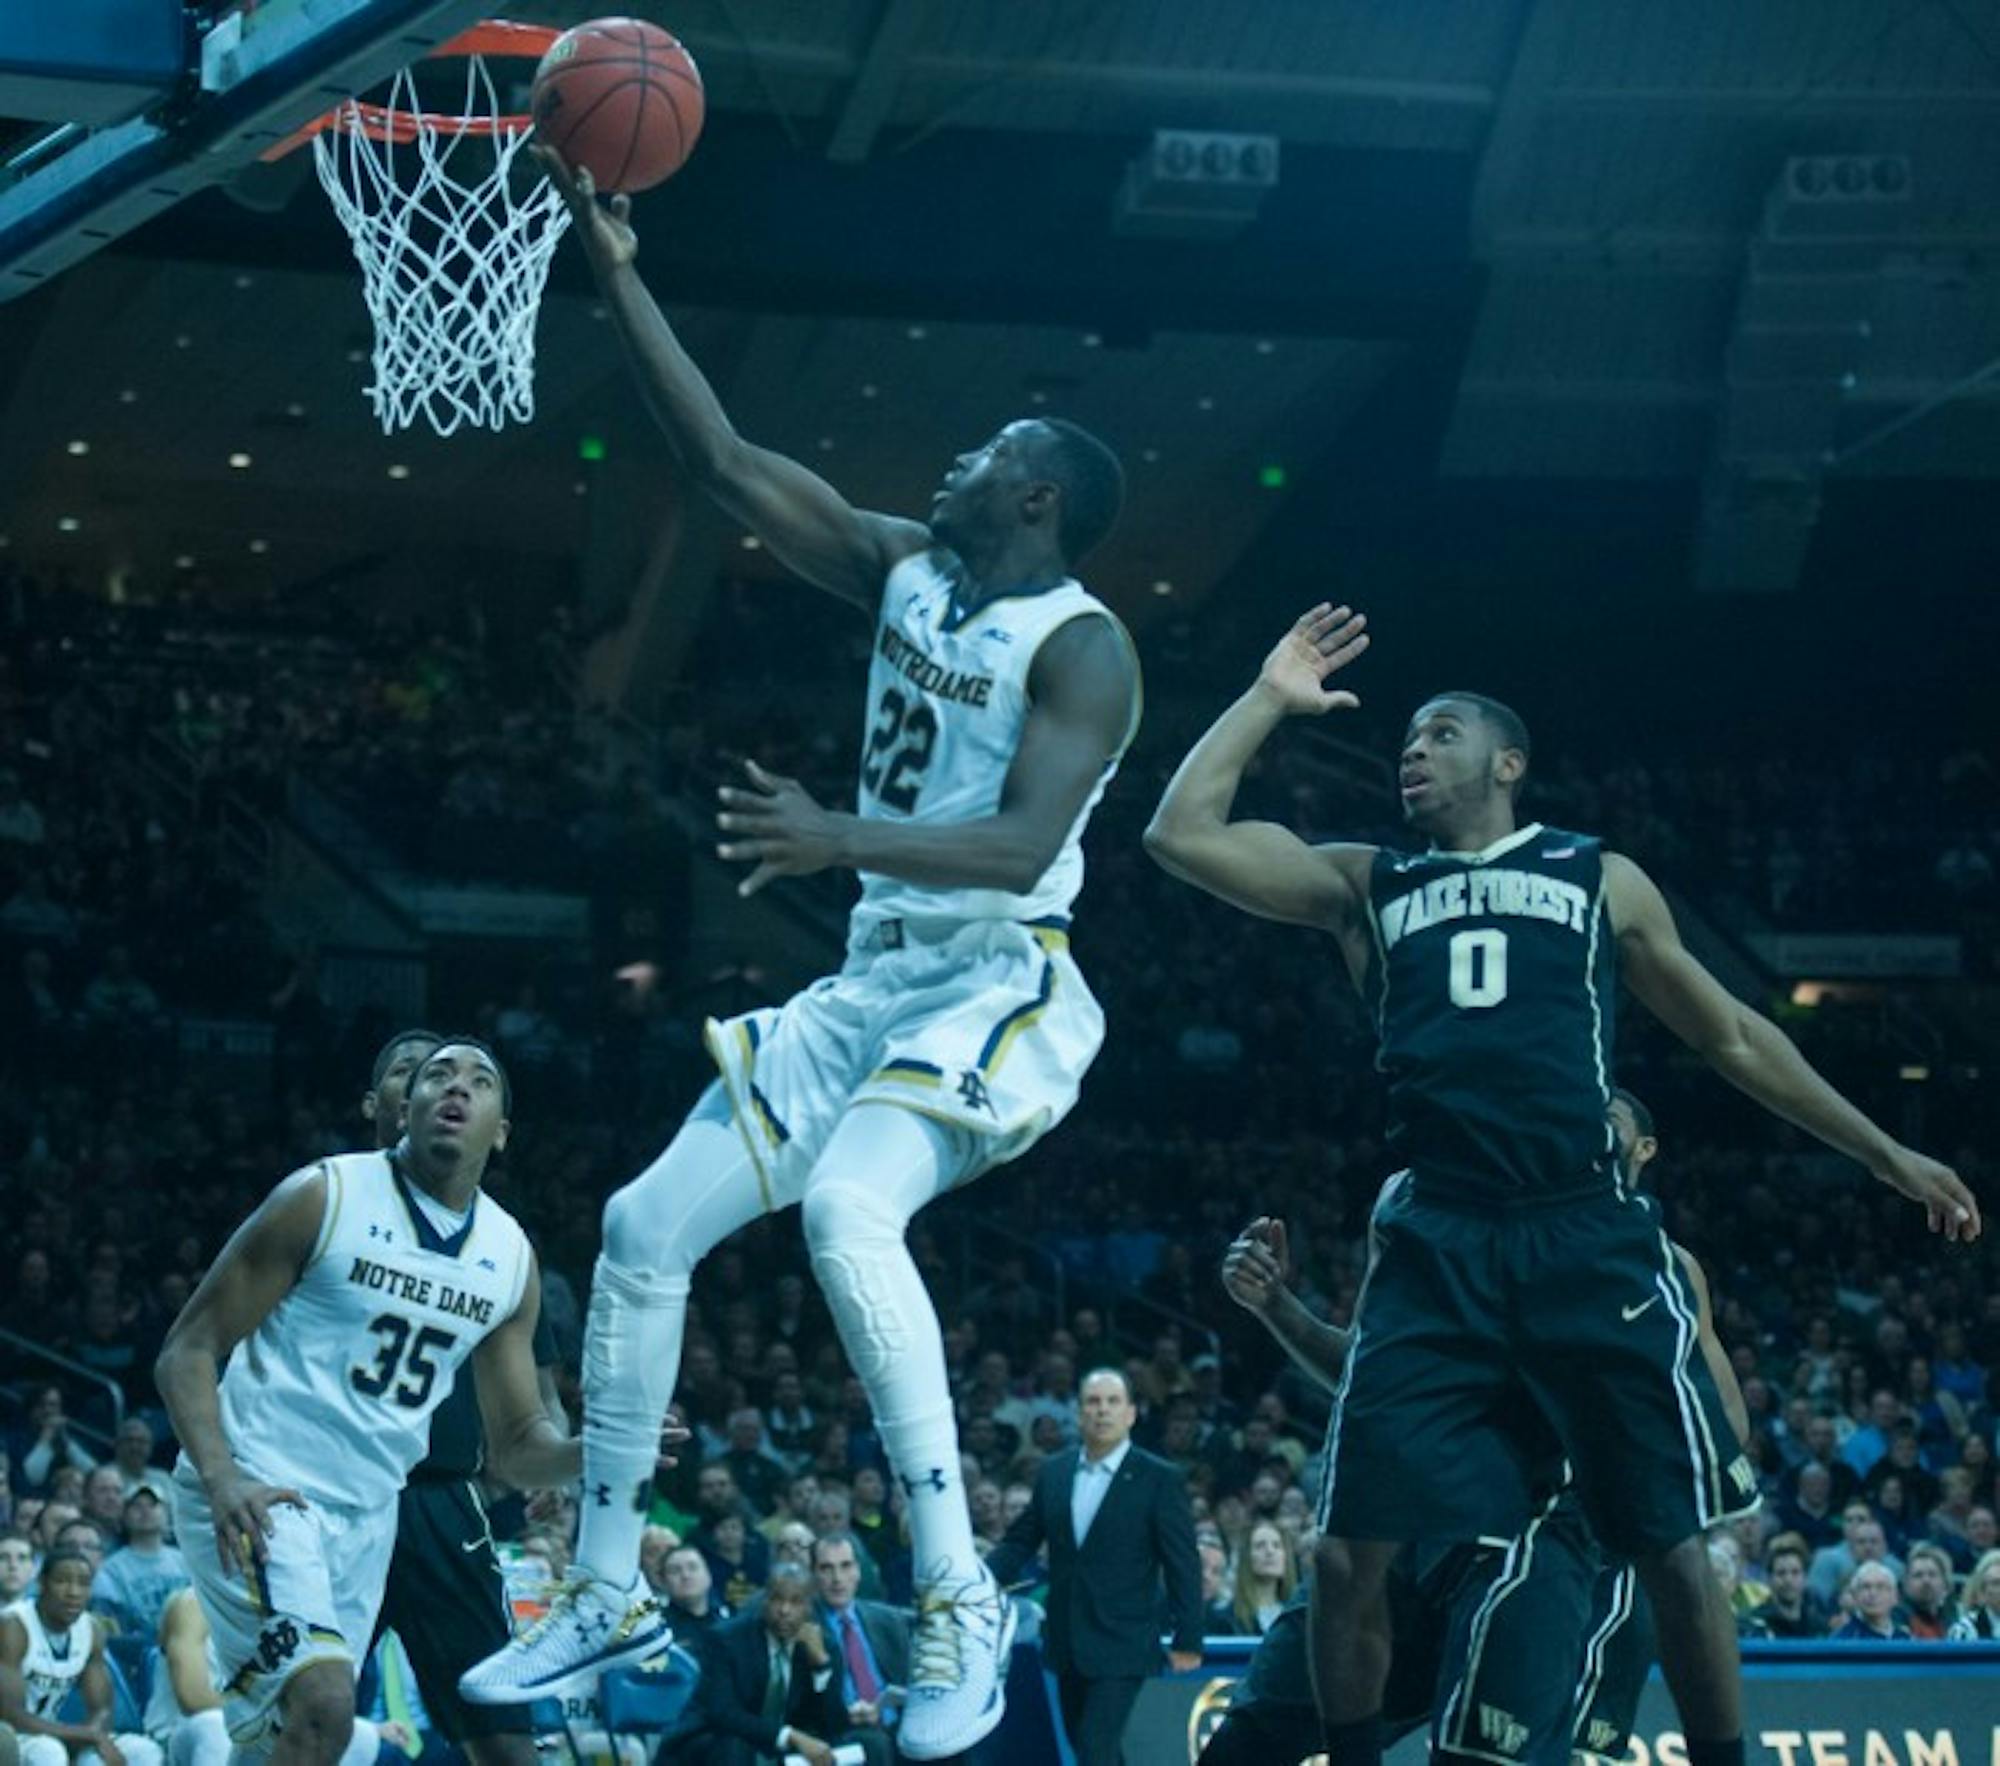 Irish senior guard Jerian Grant shoots for two against Wake Forest on Tuesday against Wake Forest in the Purcell Pavilion. Grant scored 24 points in the game.